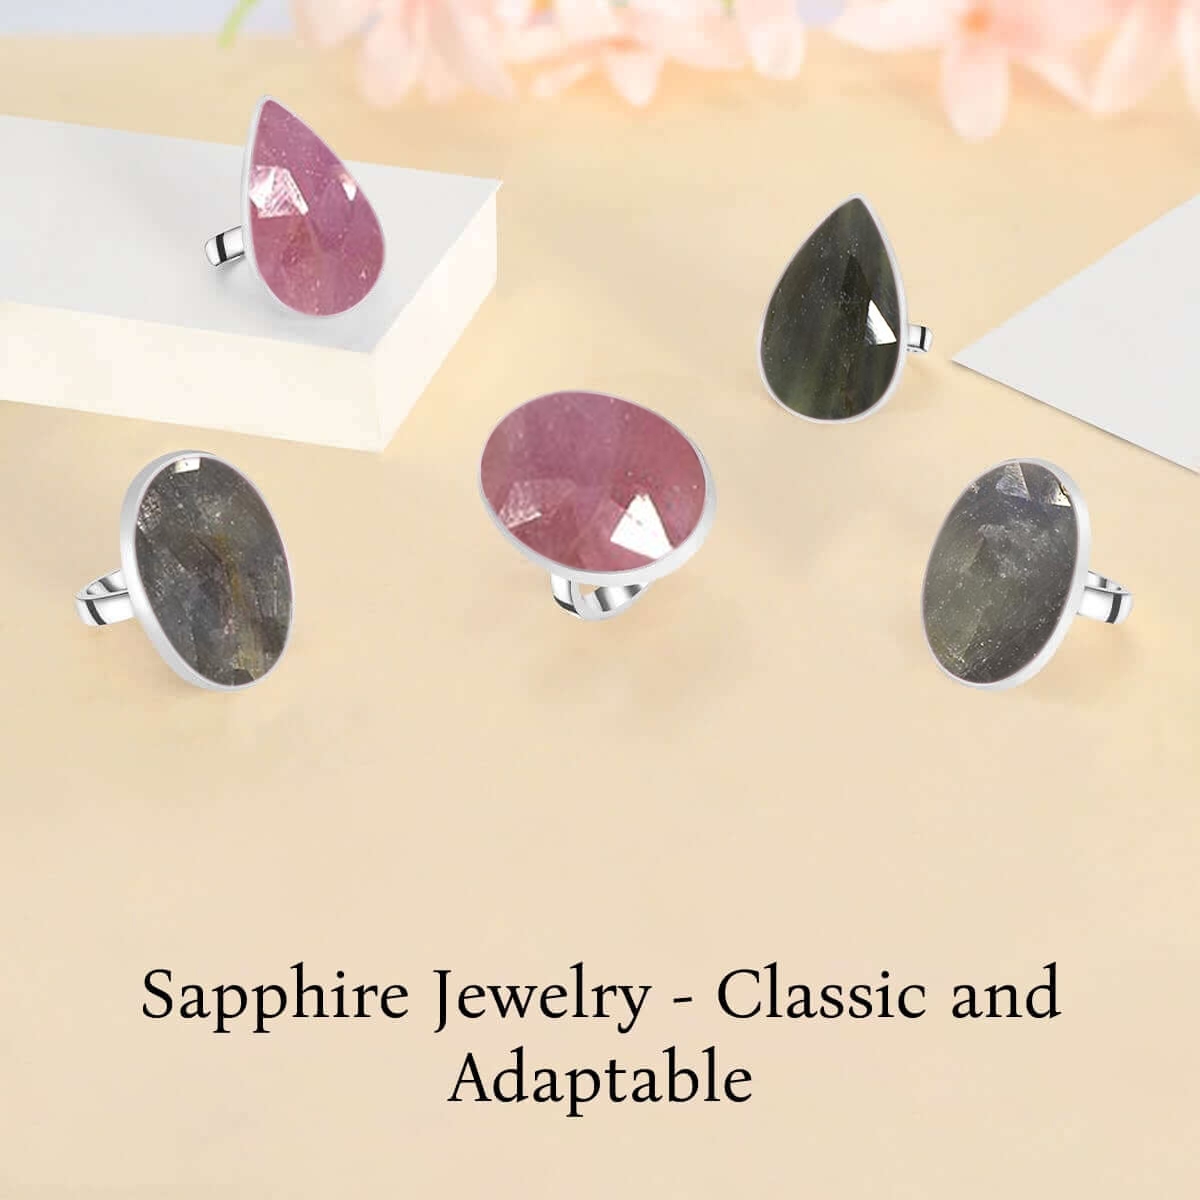 Uses of Sapphire Stone